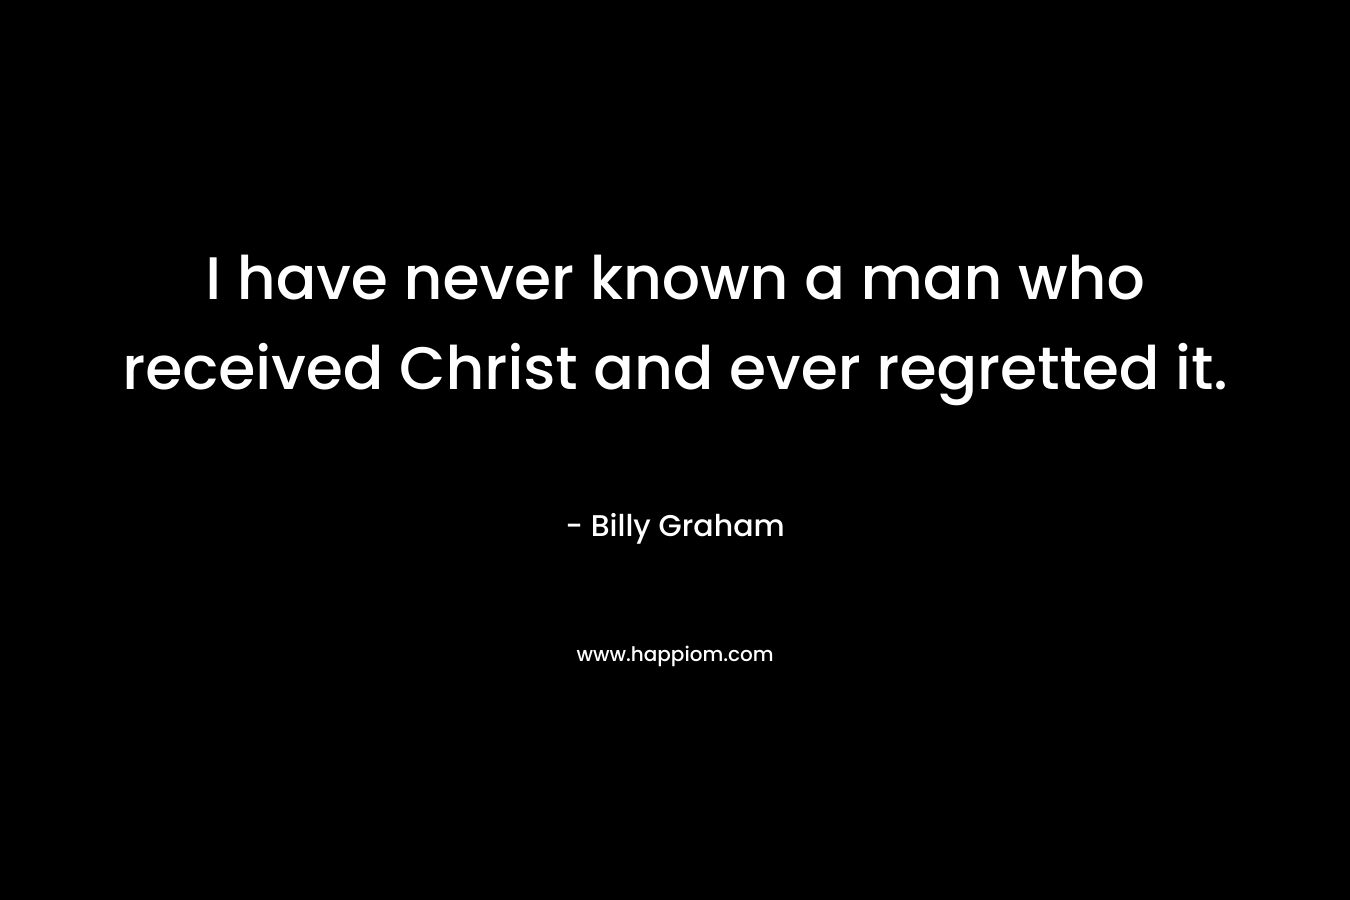 I have never known a man who received Christ and ever regretted it. – Billy Graham